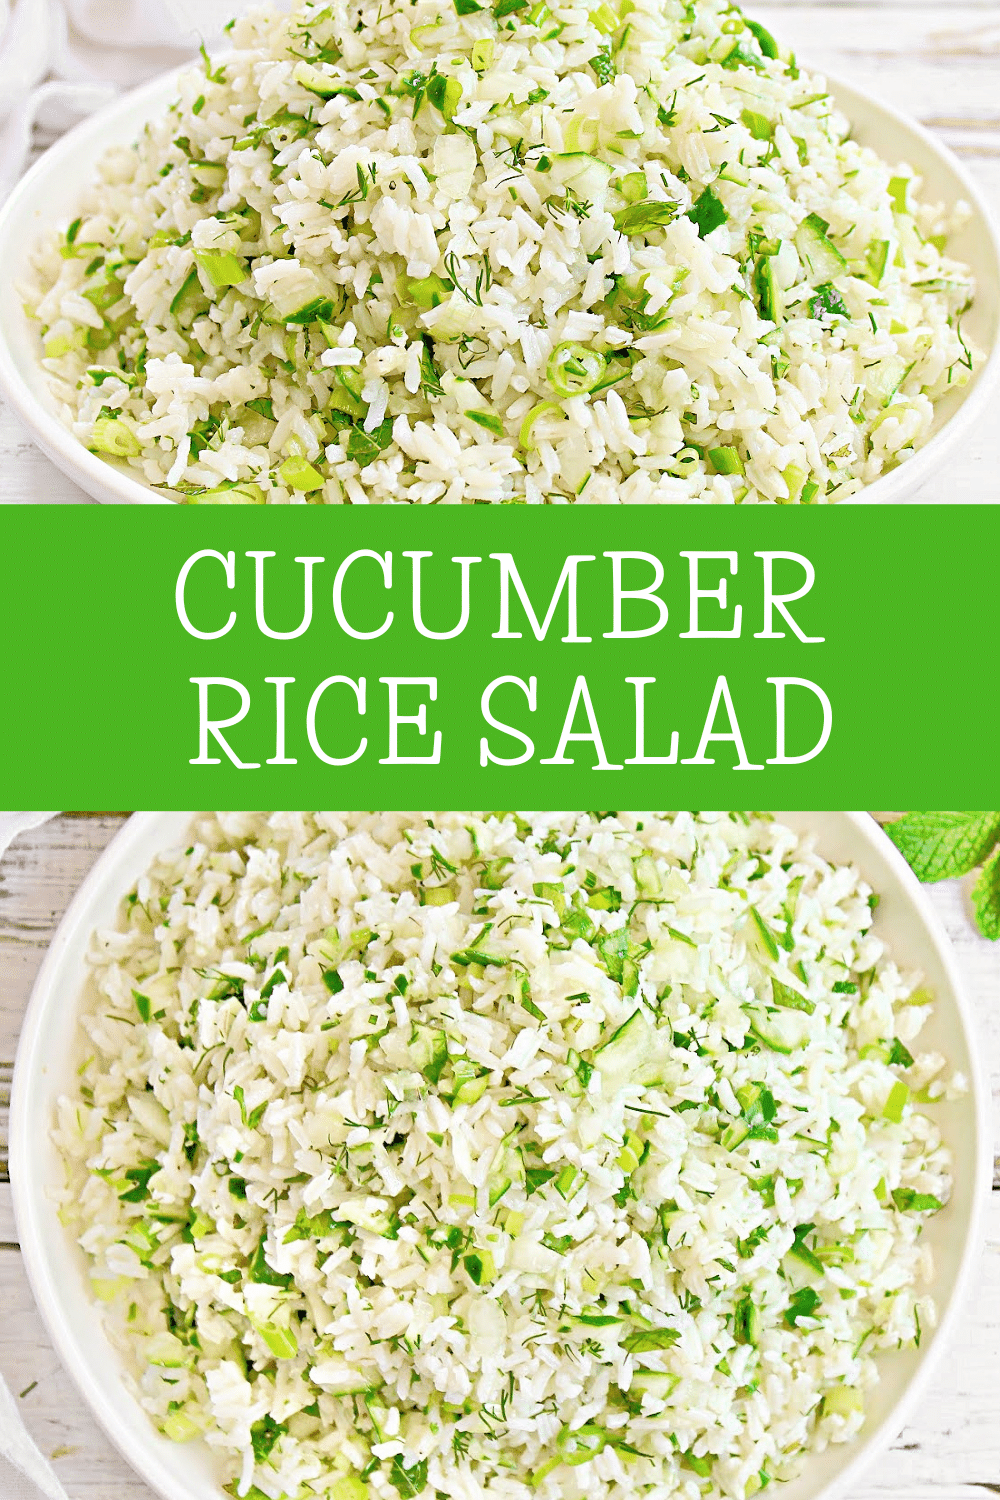 Cold Cucumber Rice Salad recipe! A crisp and refreshing blend of garden-fresh cucumbers and fluffy rice, lightly dressed to perfection. via @thiswifecooks